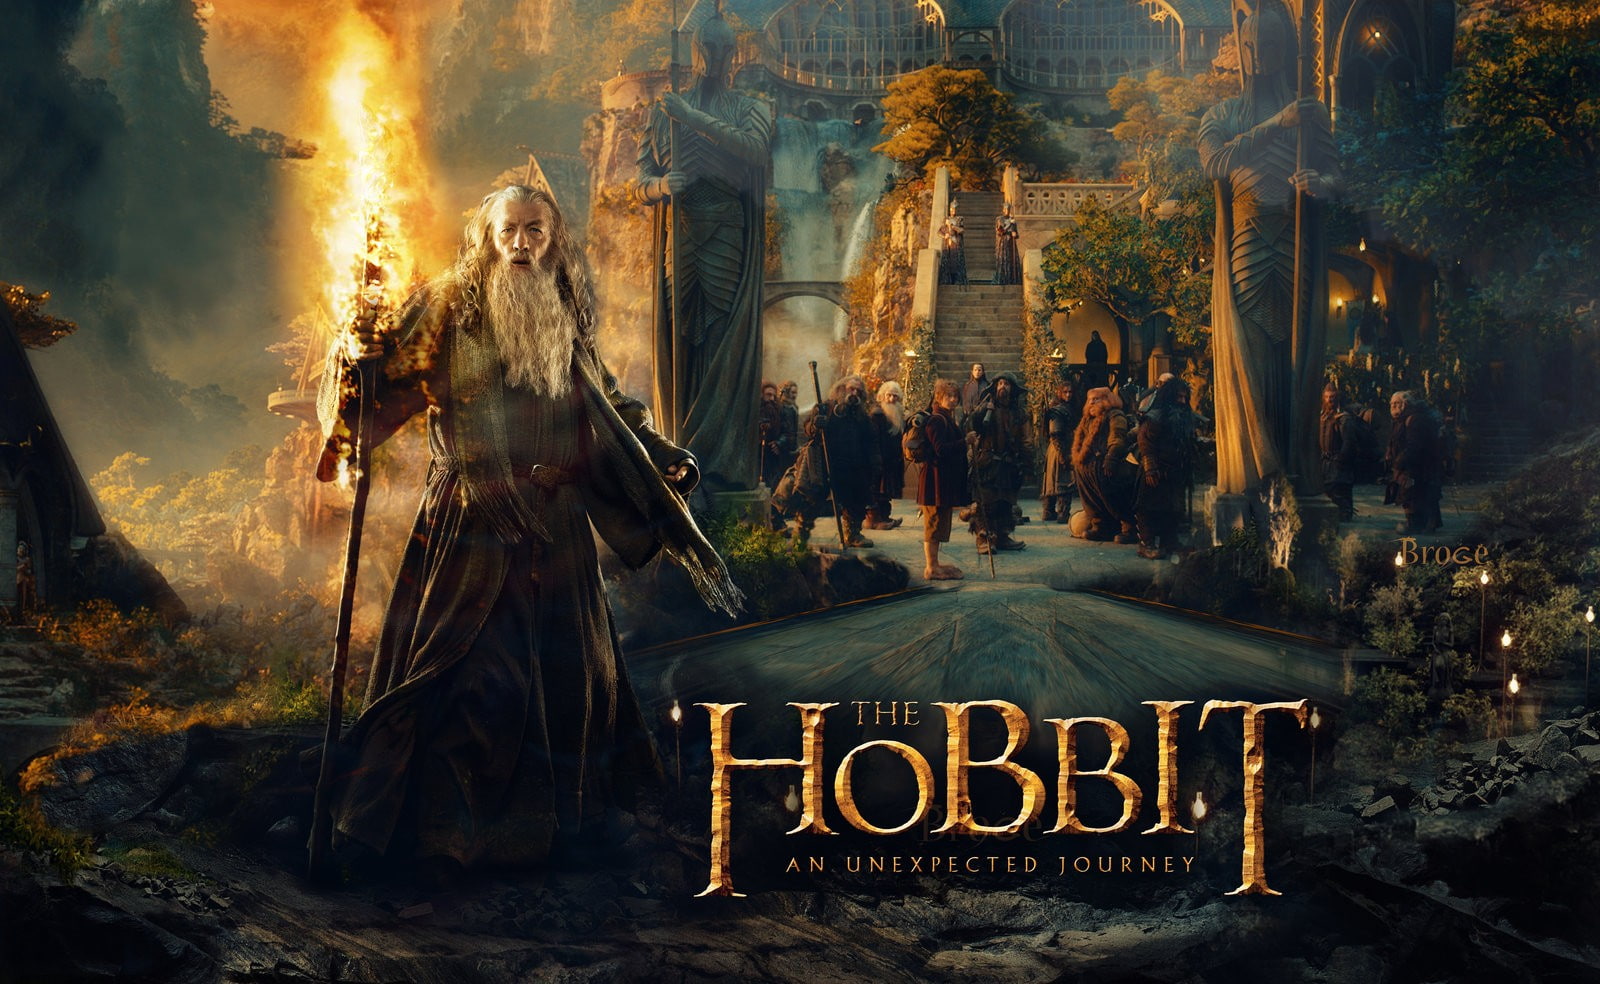 The Hobbit, movies, The Hobbit: An Unexpected Journey, Gandalf